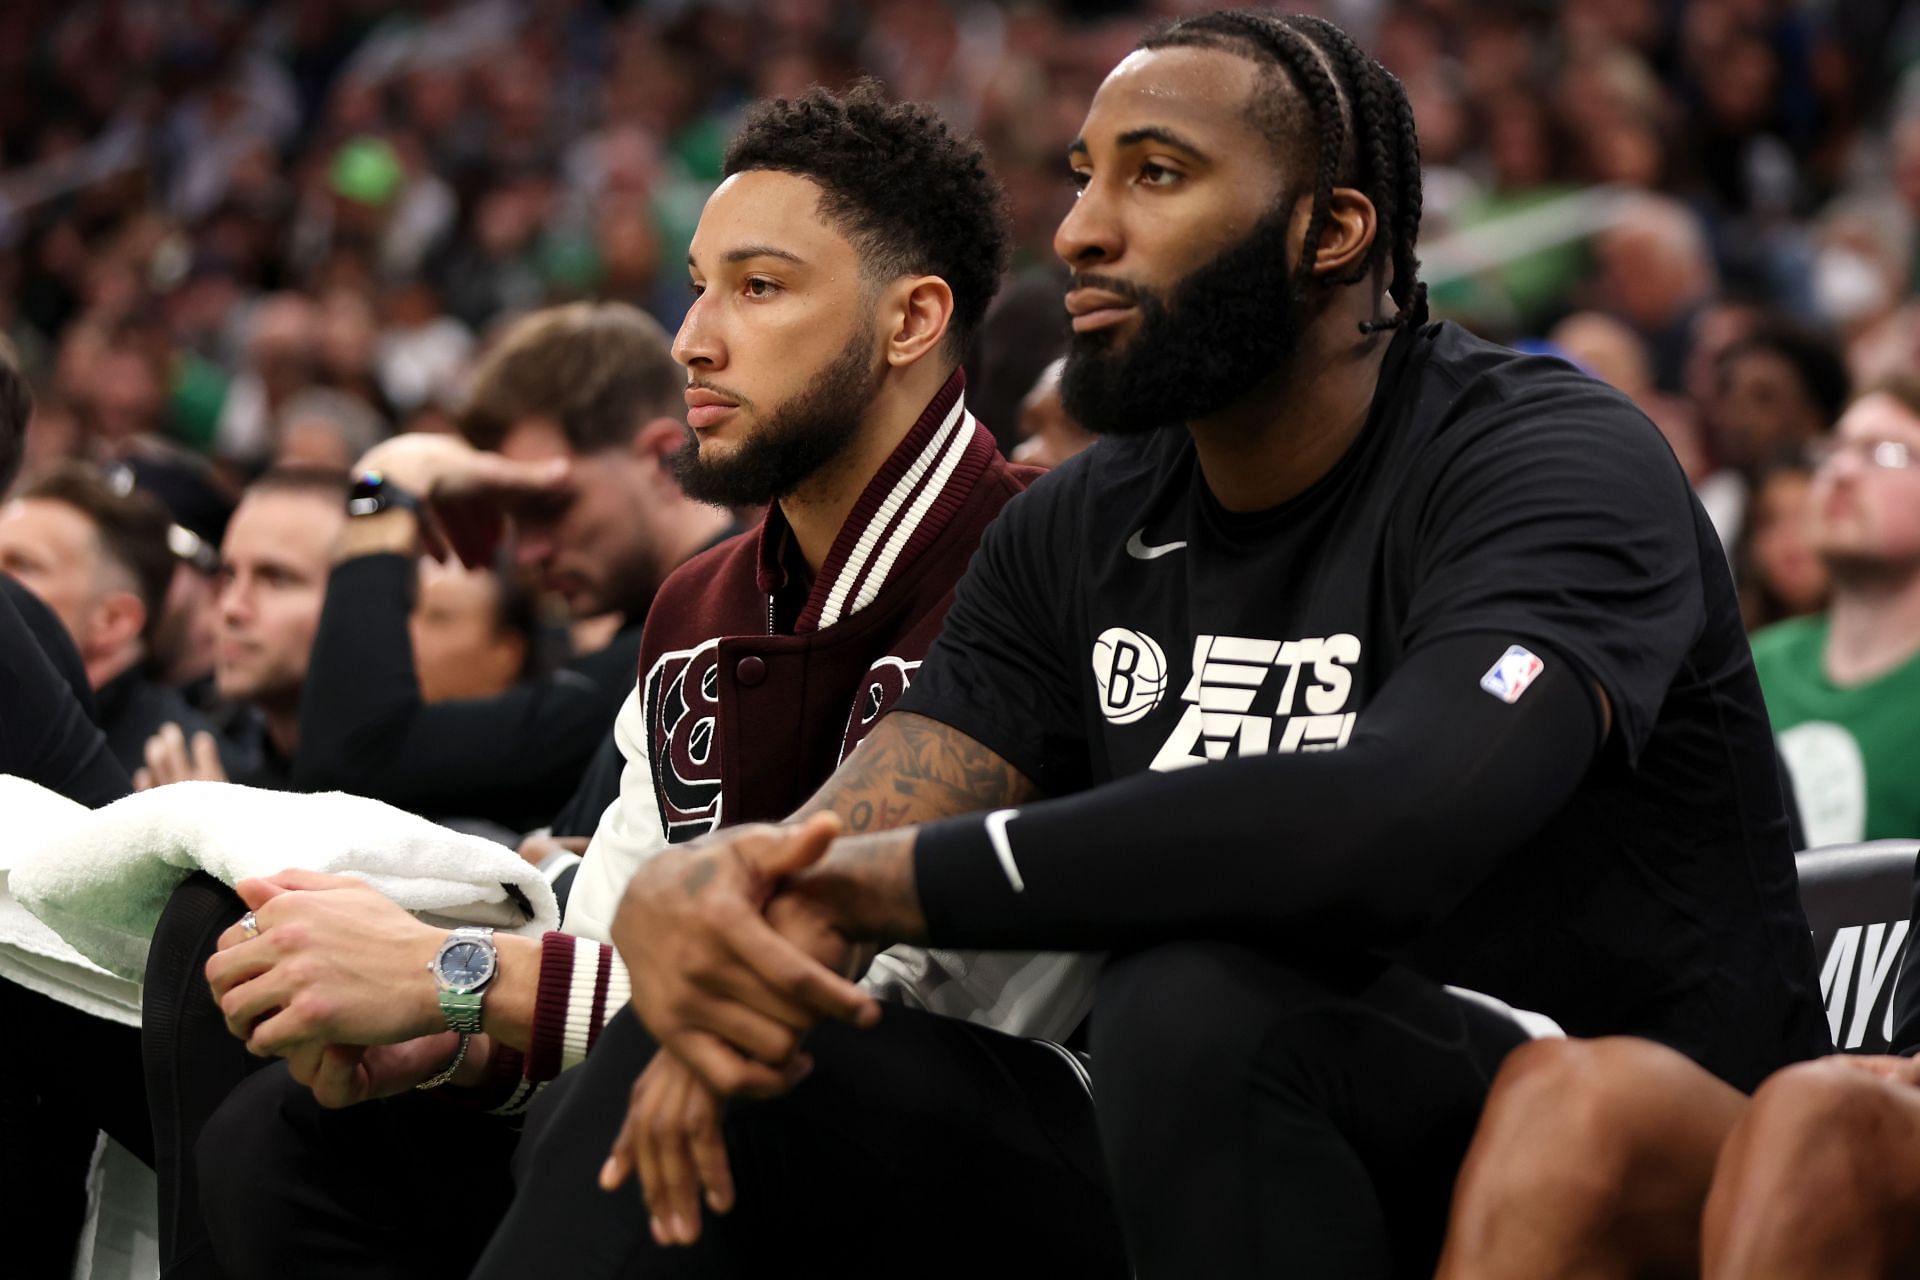 NBA insider dismisses claims that Ben Simmons left the Nets group chat after being asked to play in Game 4 vs the Celtics